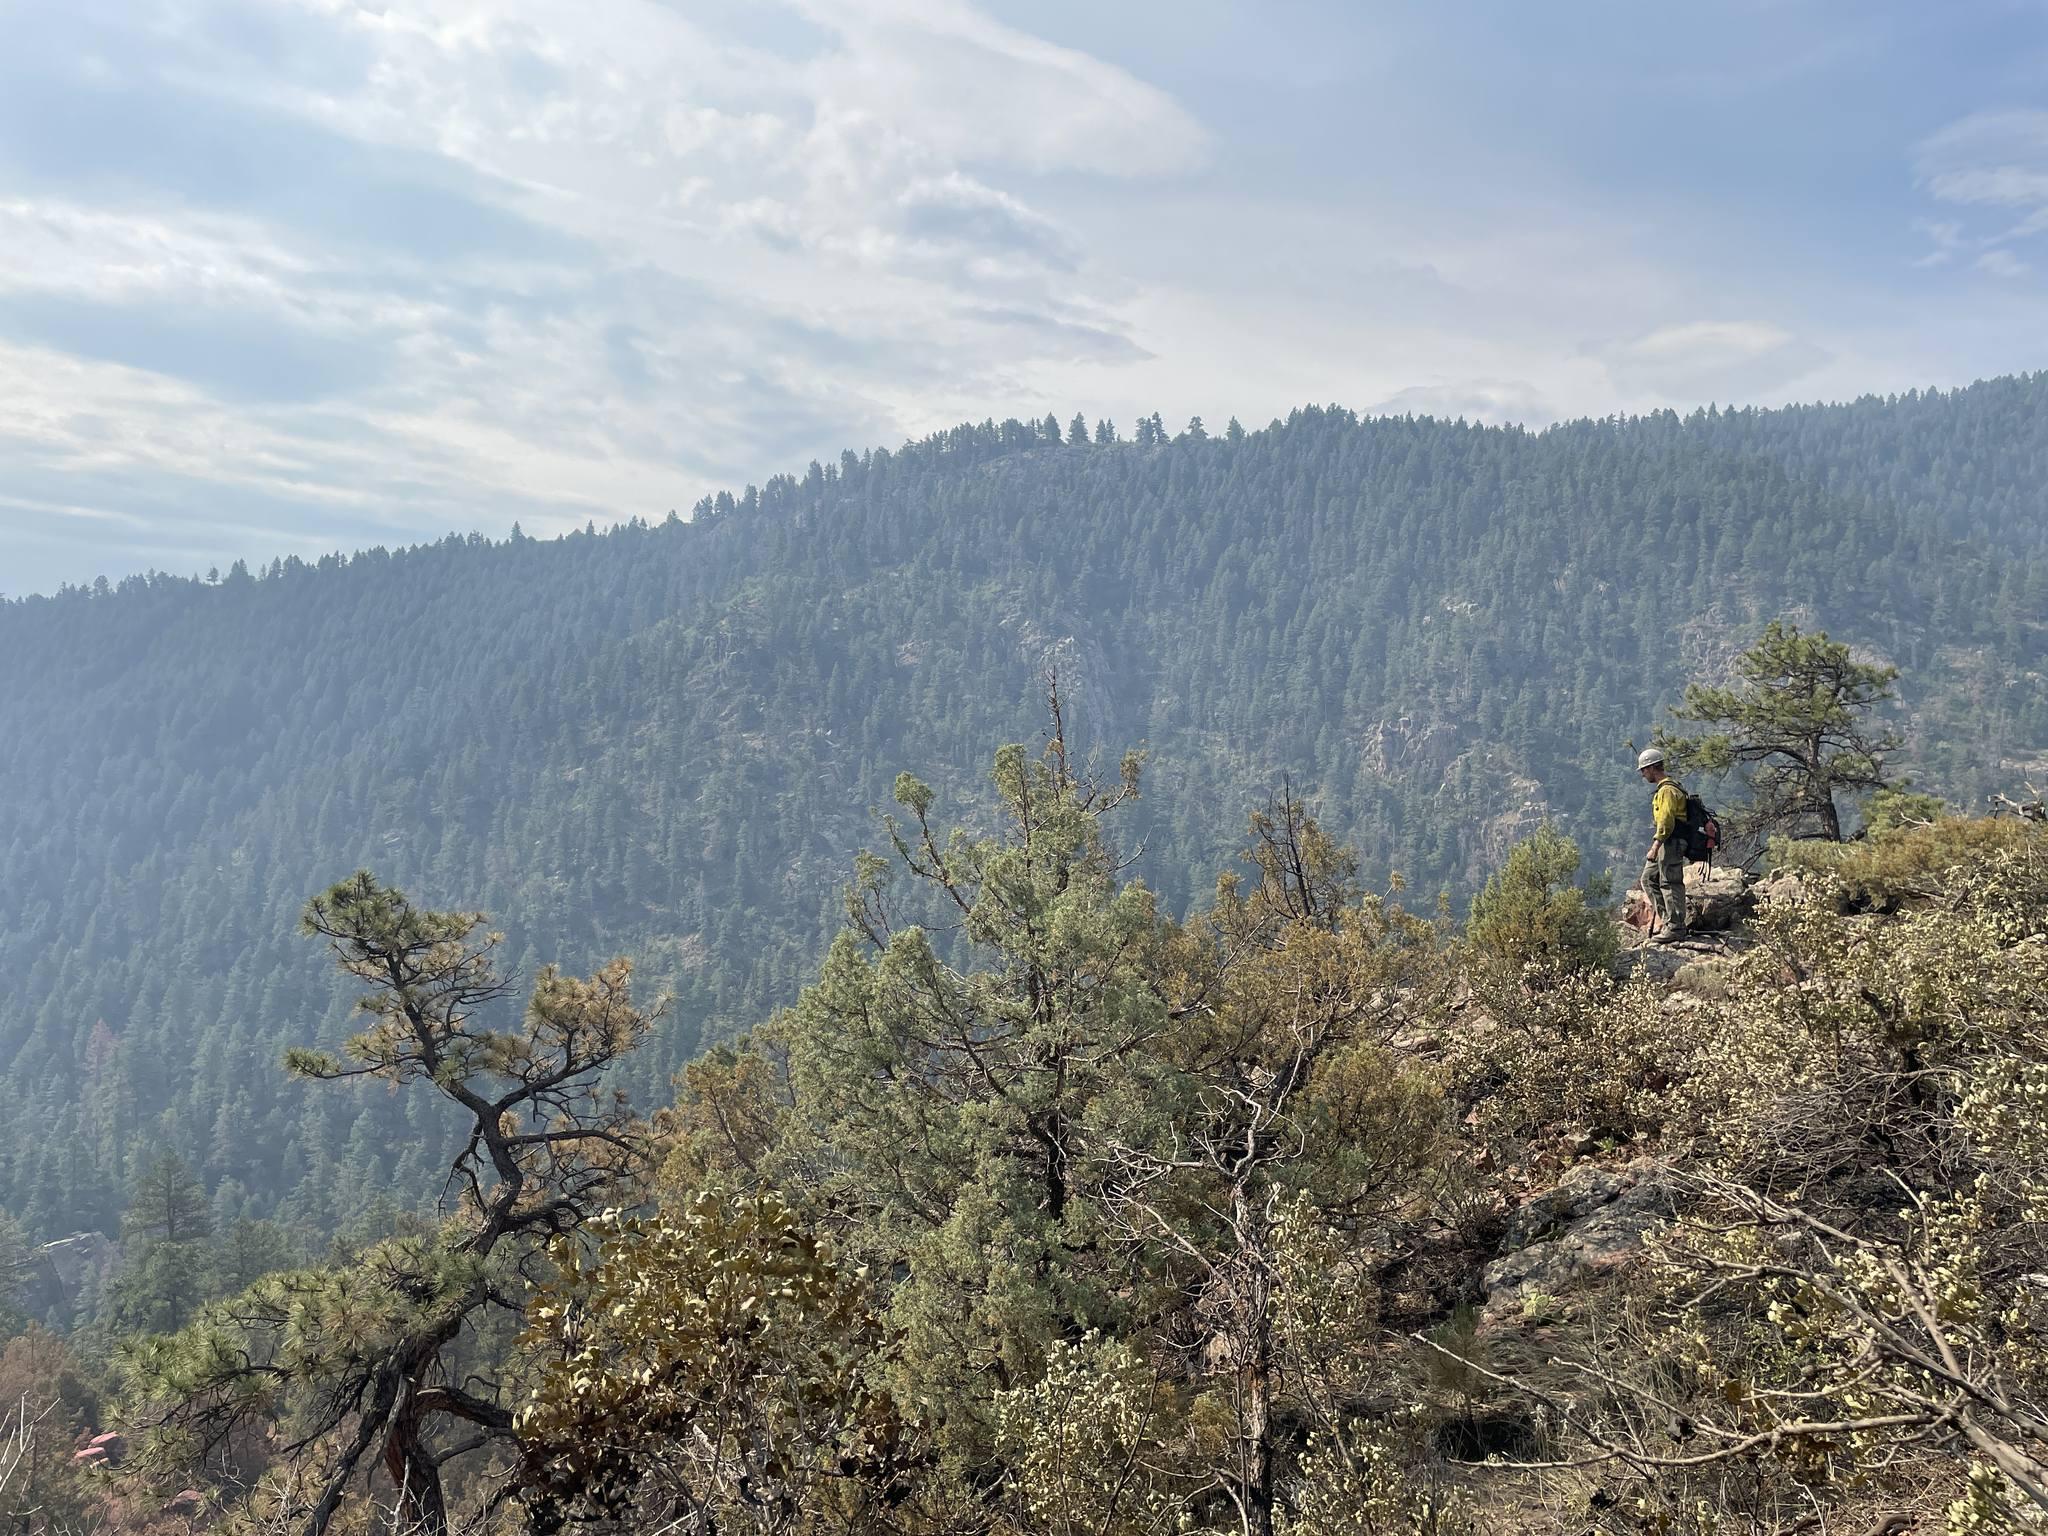 A firefighter in Nomex stands on the edge of a sparsely vegetated overlook of the Oak Ridge Fire. A mountain full of evergreens is in the background. Clouds almost fill the blue sky.